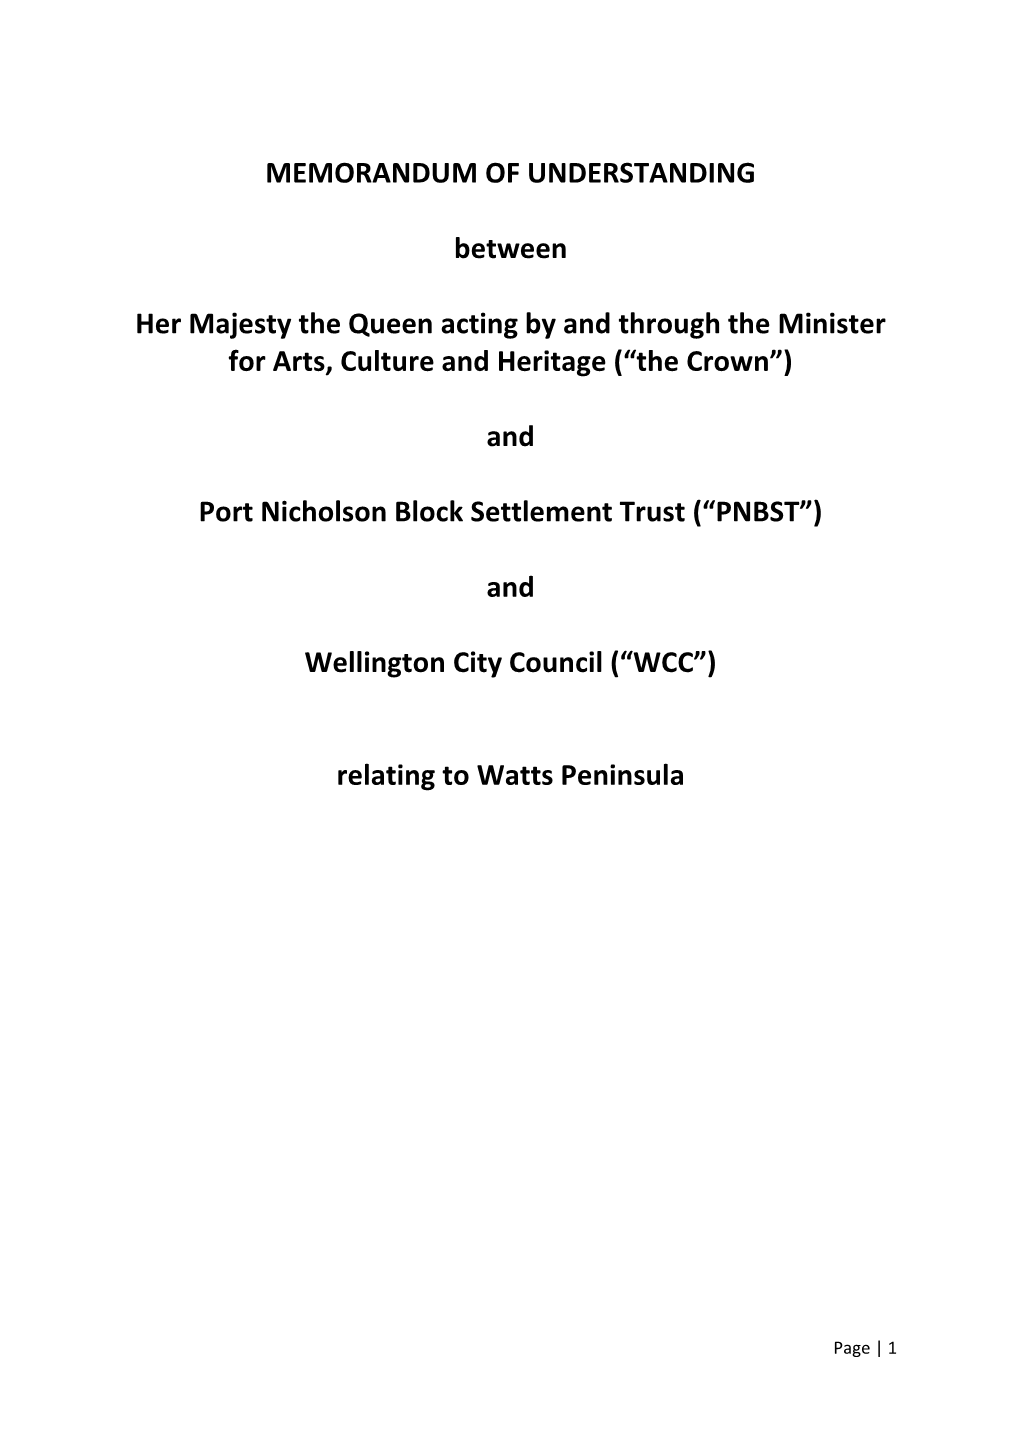 MEMORANDUM of UNDERSTANDING Between Her Majesty the Queen Acting by and Through the Minister for Arts, Culture and Heritage (“